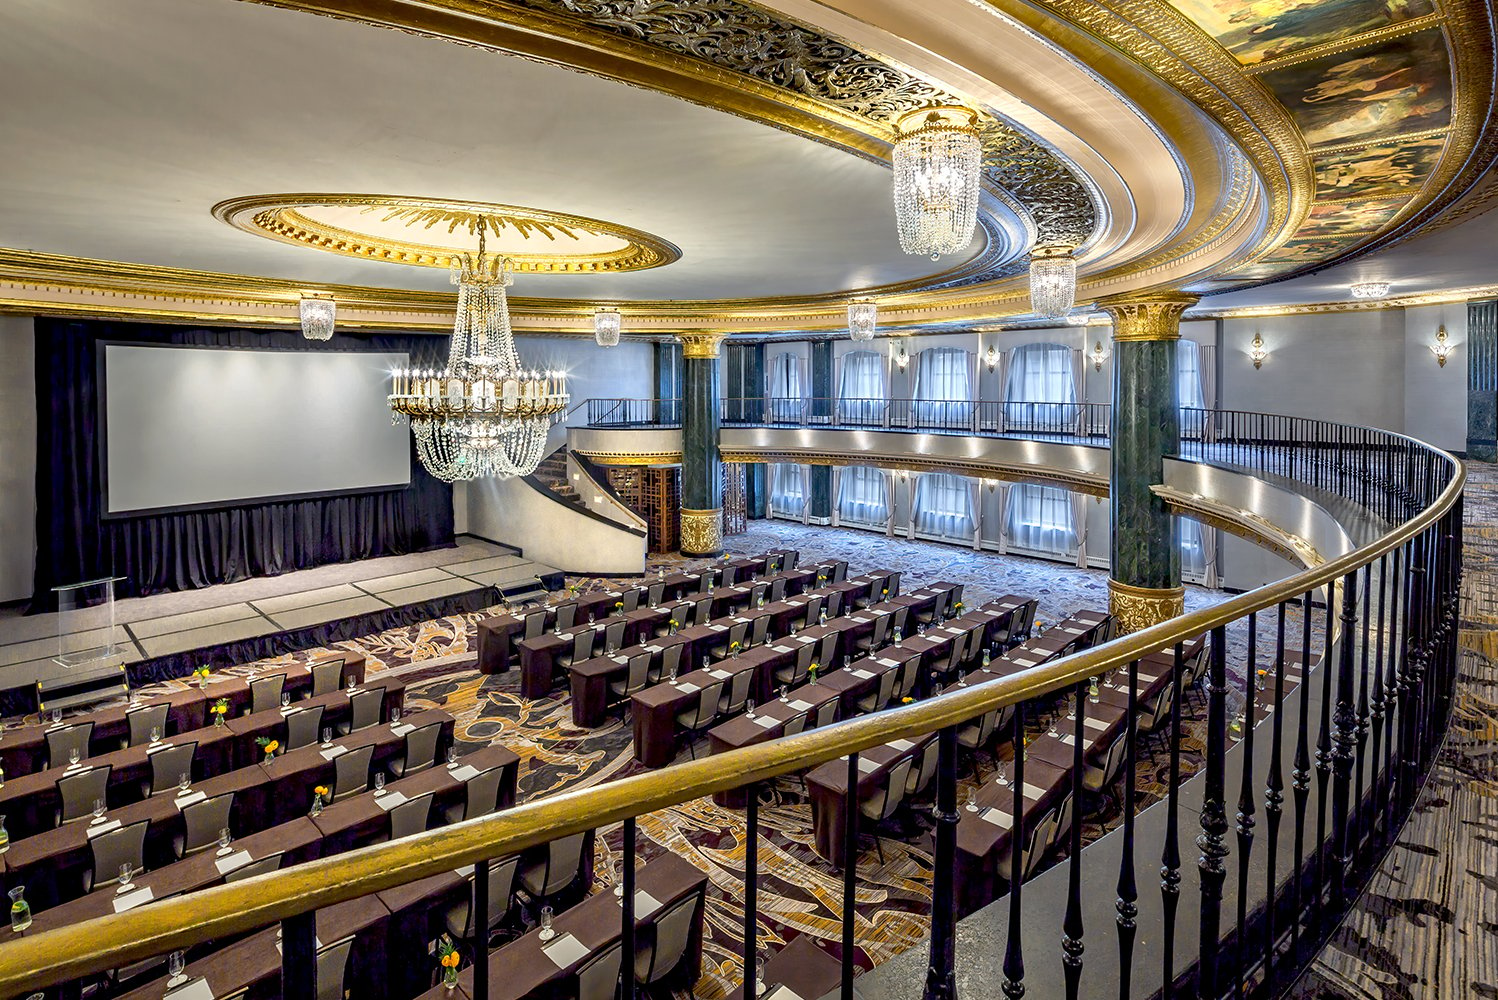 InterContinental Chicago Magnificent Mile Hotel renovates meeting spaces